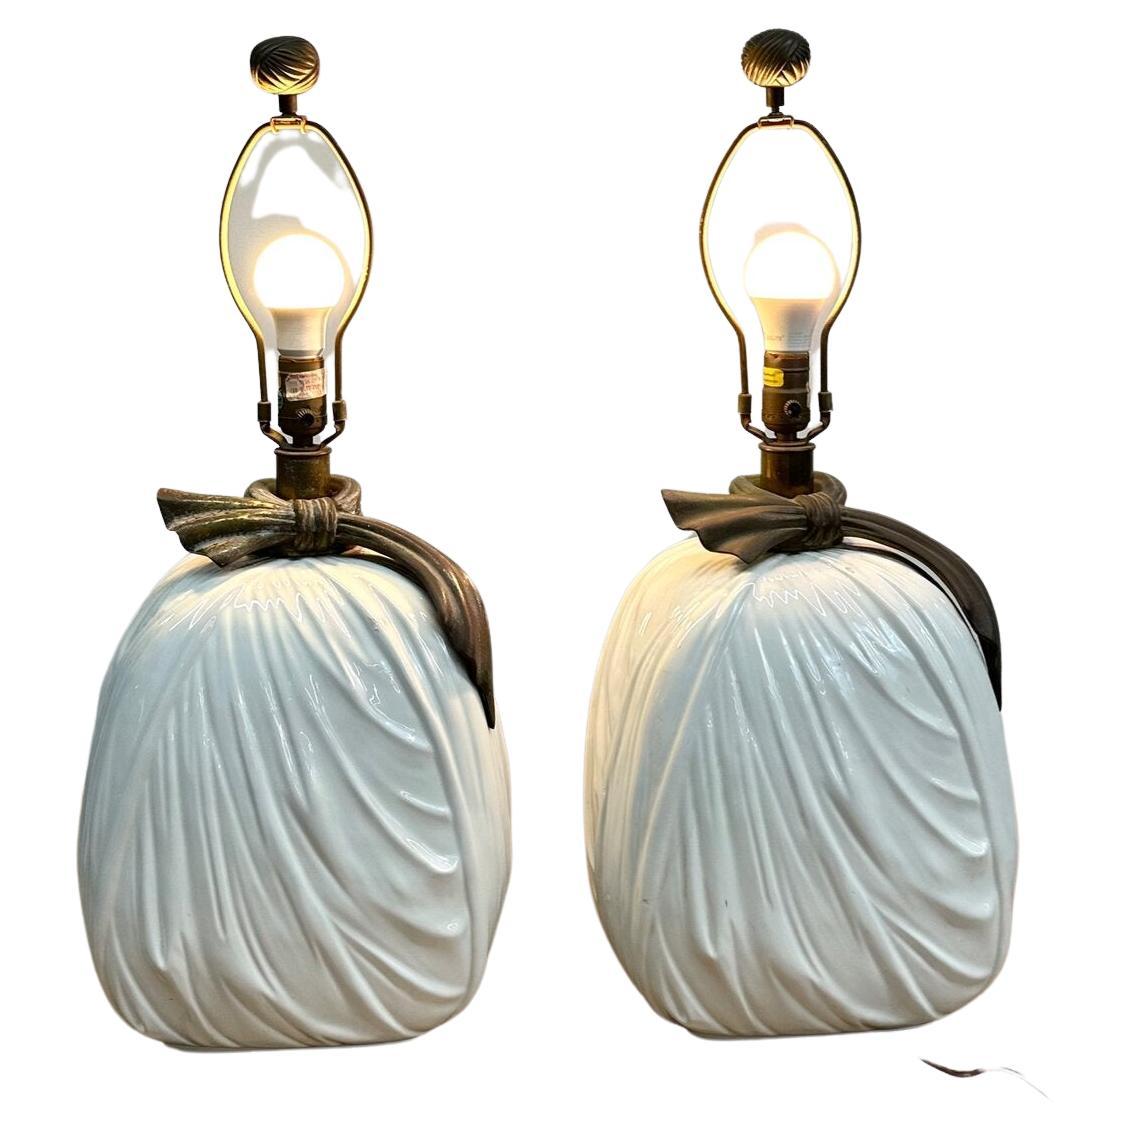 Ceramic and Patinated Brass Lamps by Chapman